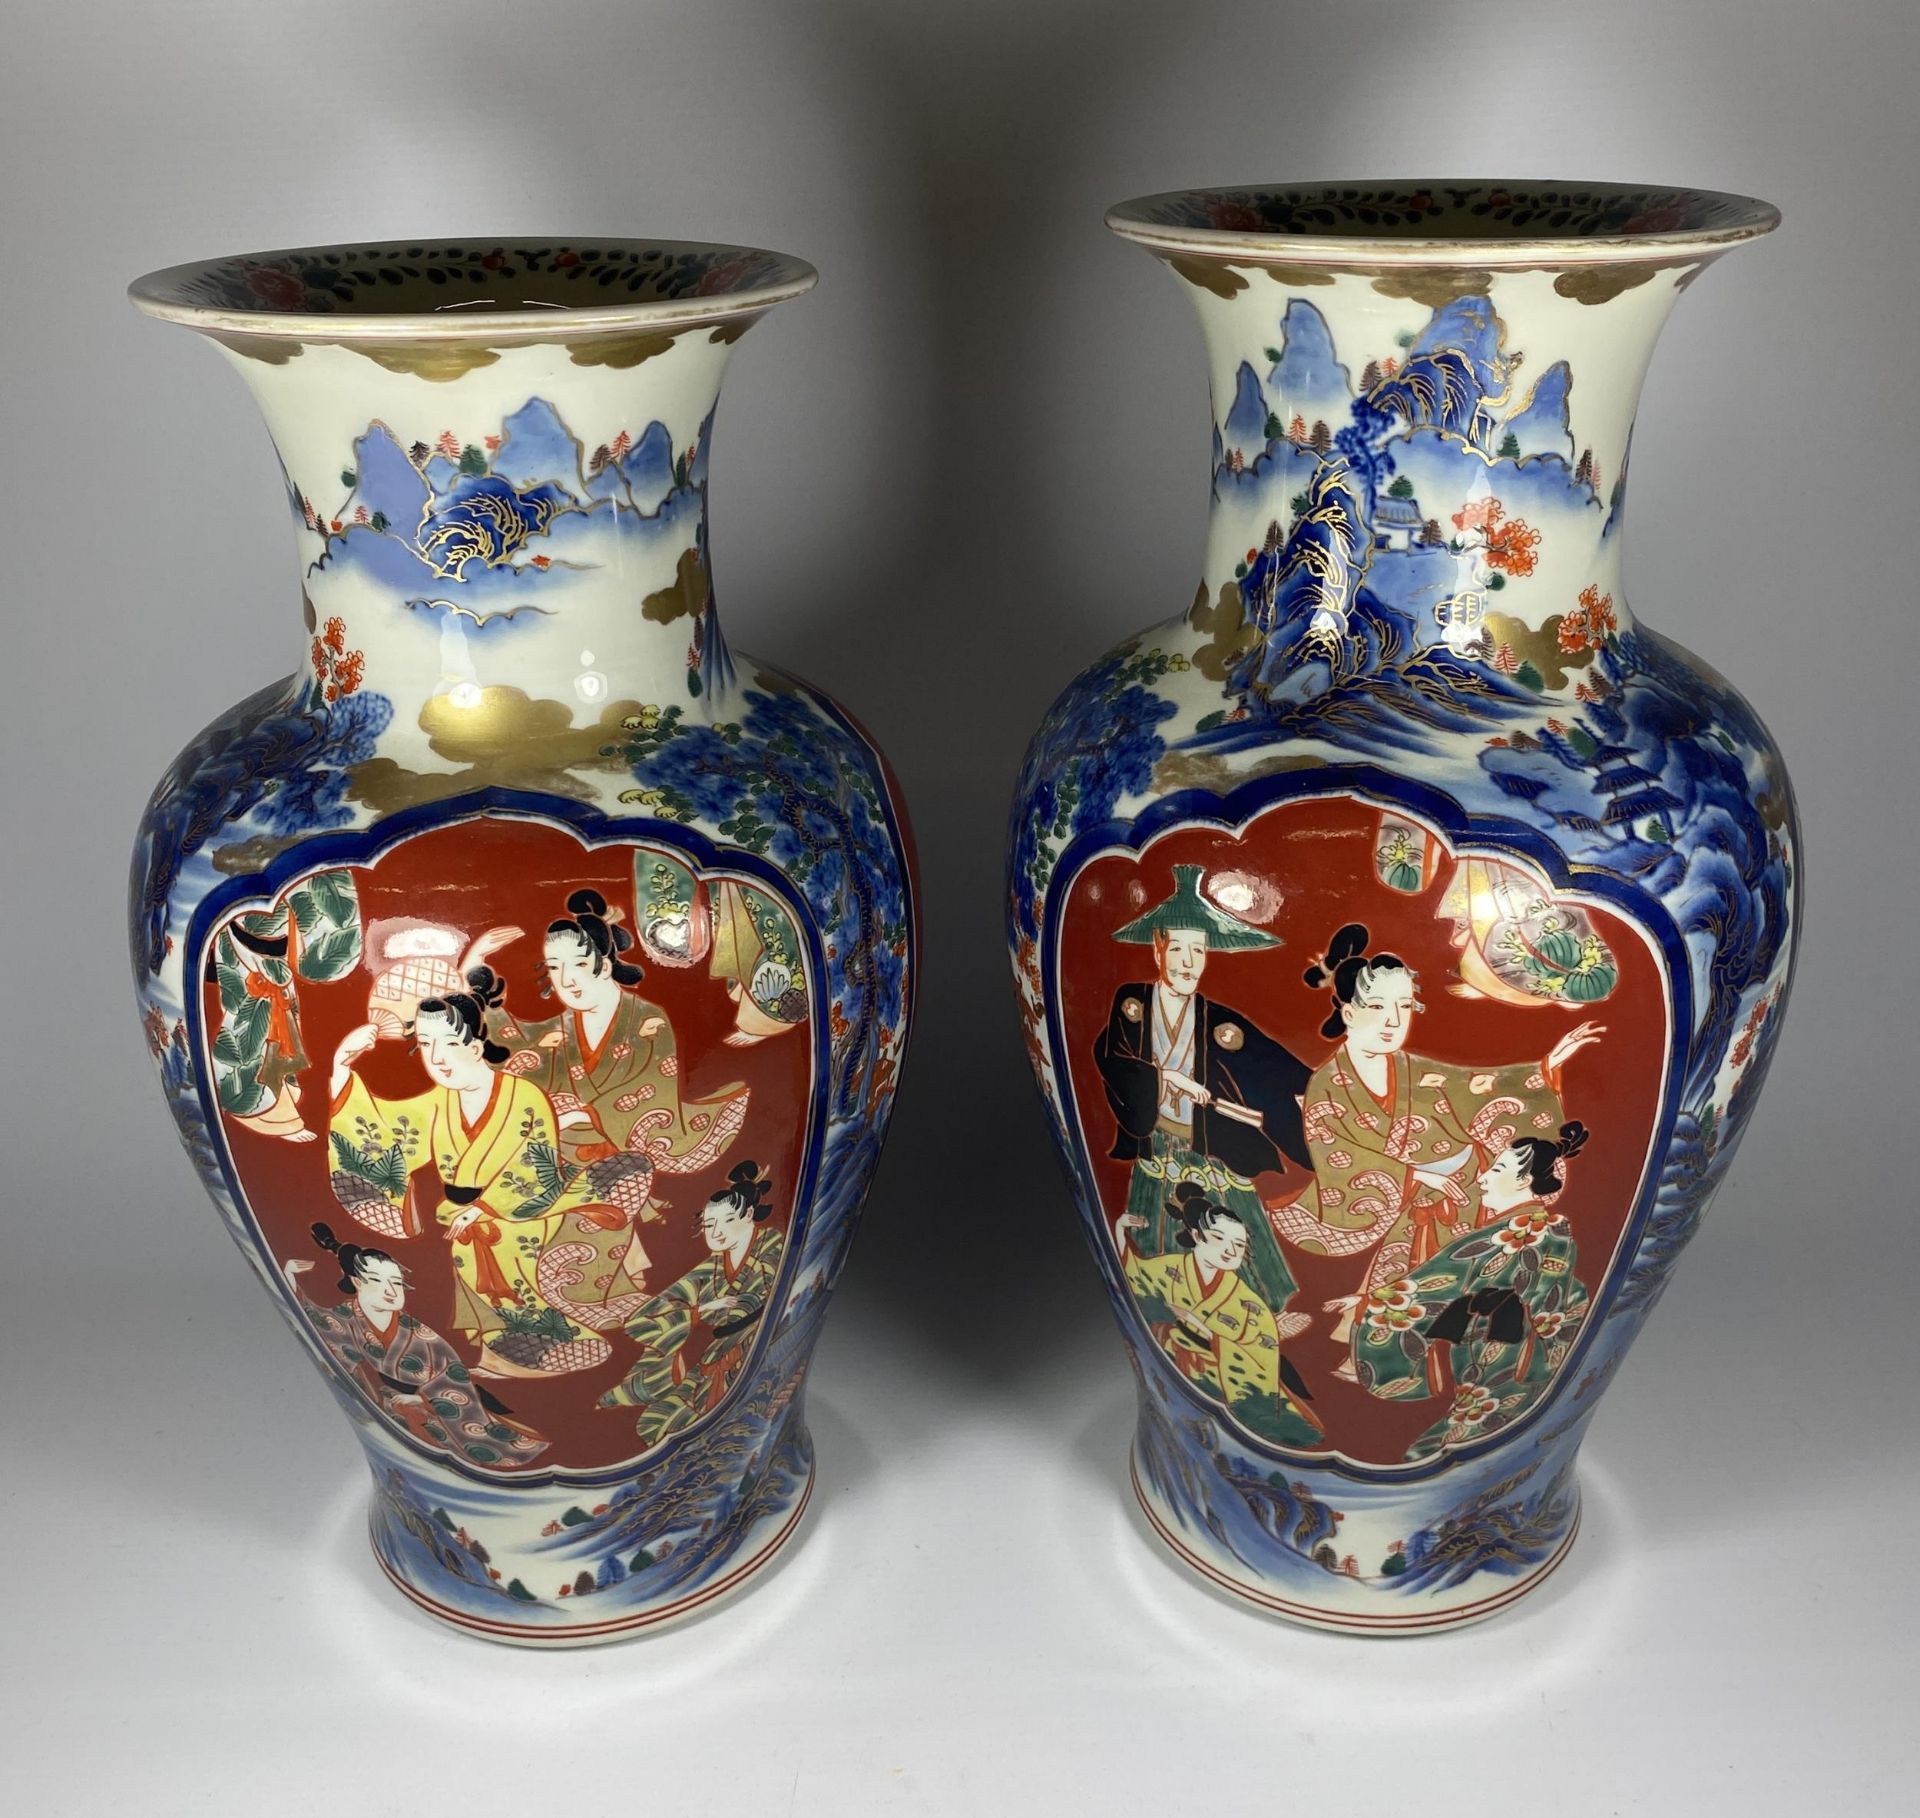 A LARGE PAIR OF JAPANESE MEIJI PERIOD (1868-1912) VASES WITH FIGURAL PANELS ON A MOUNTAIN